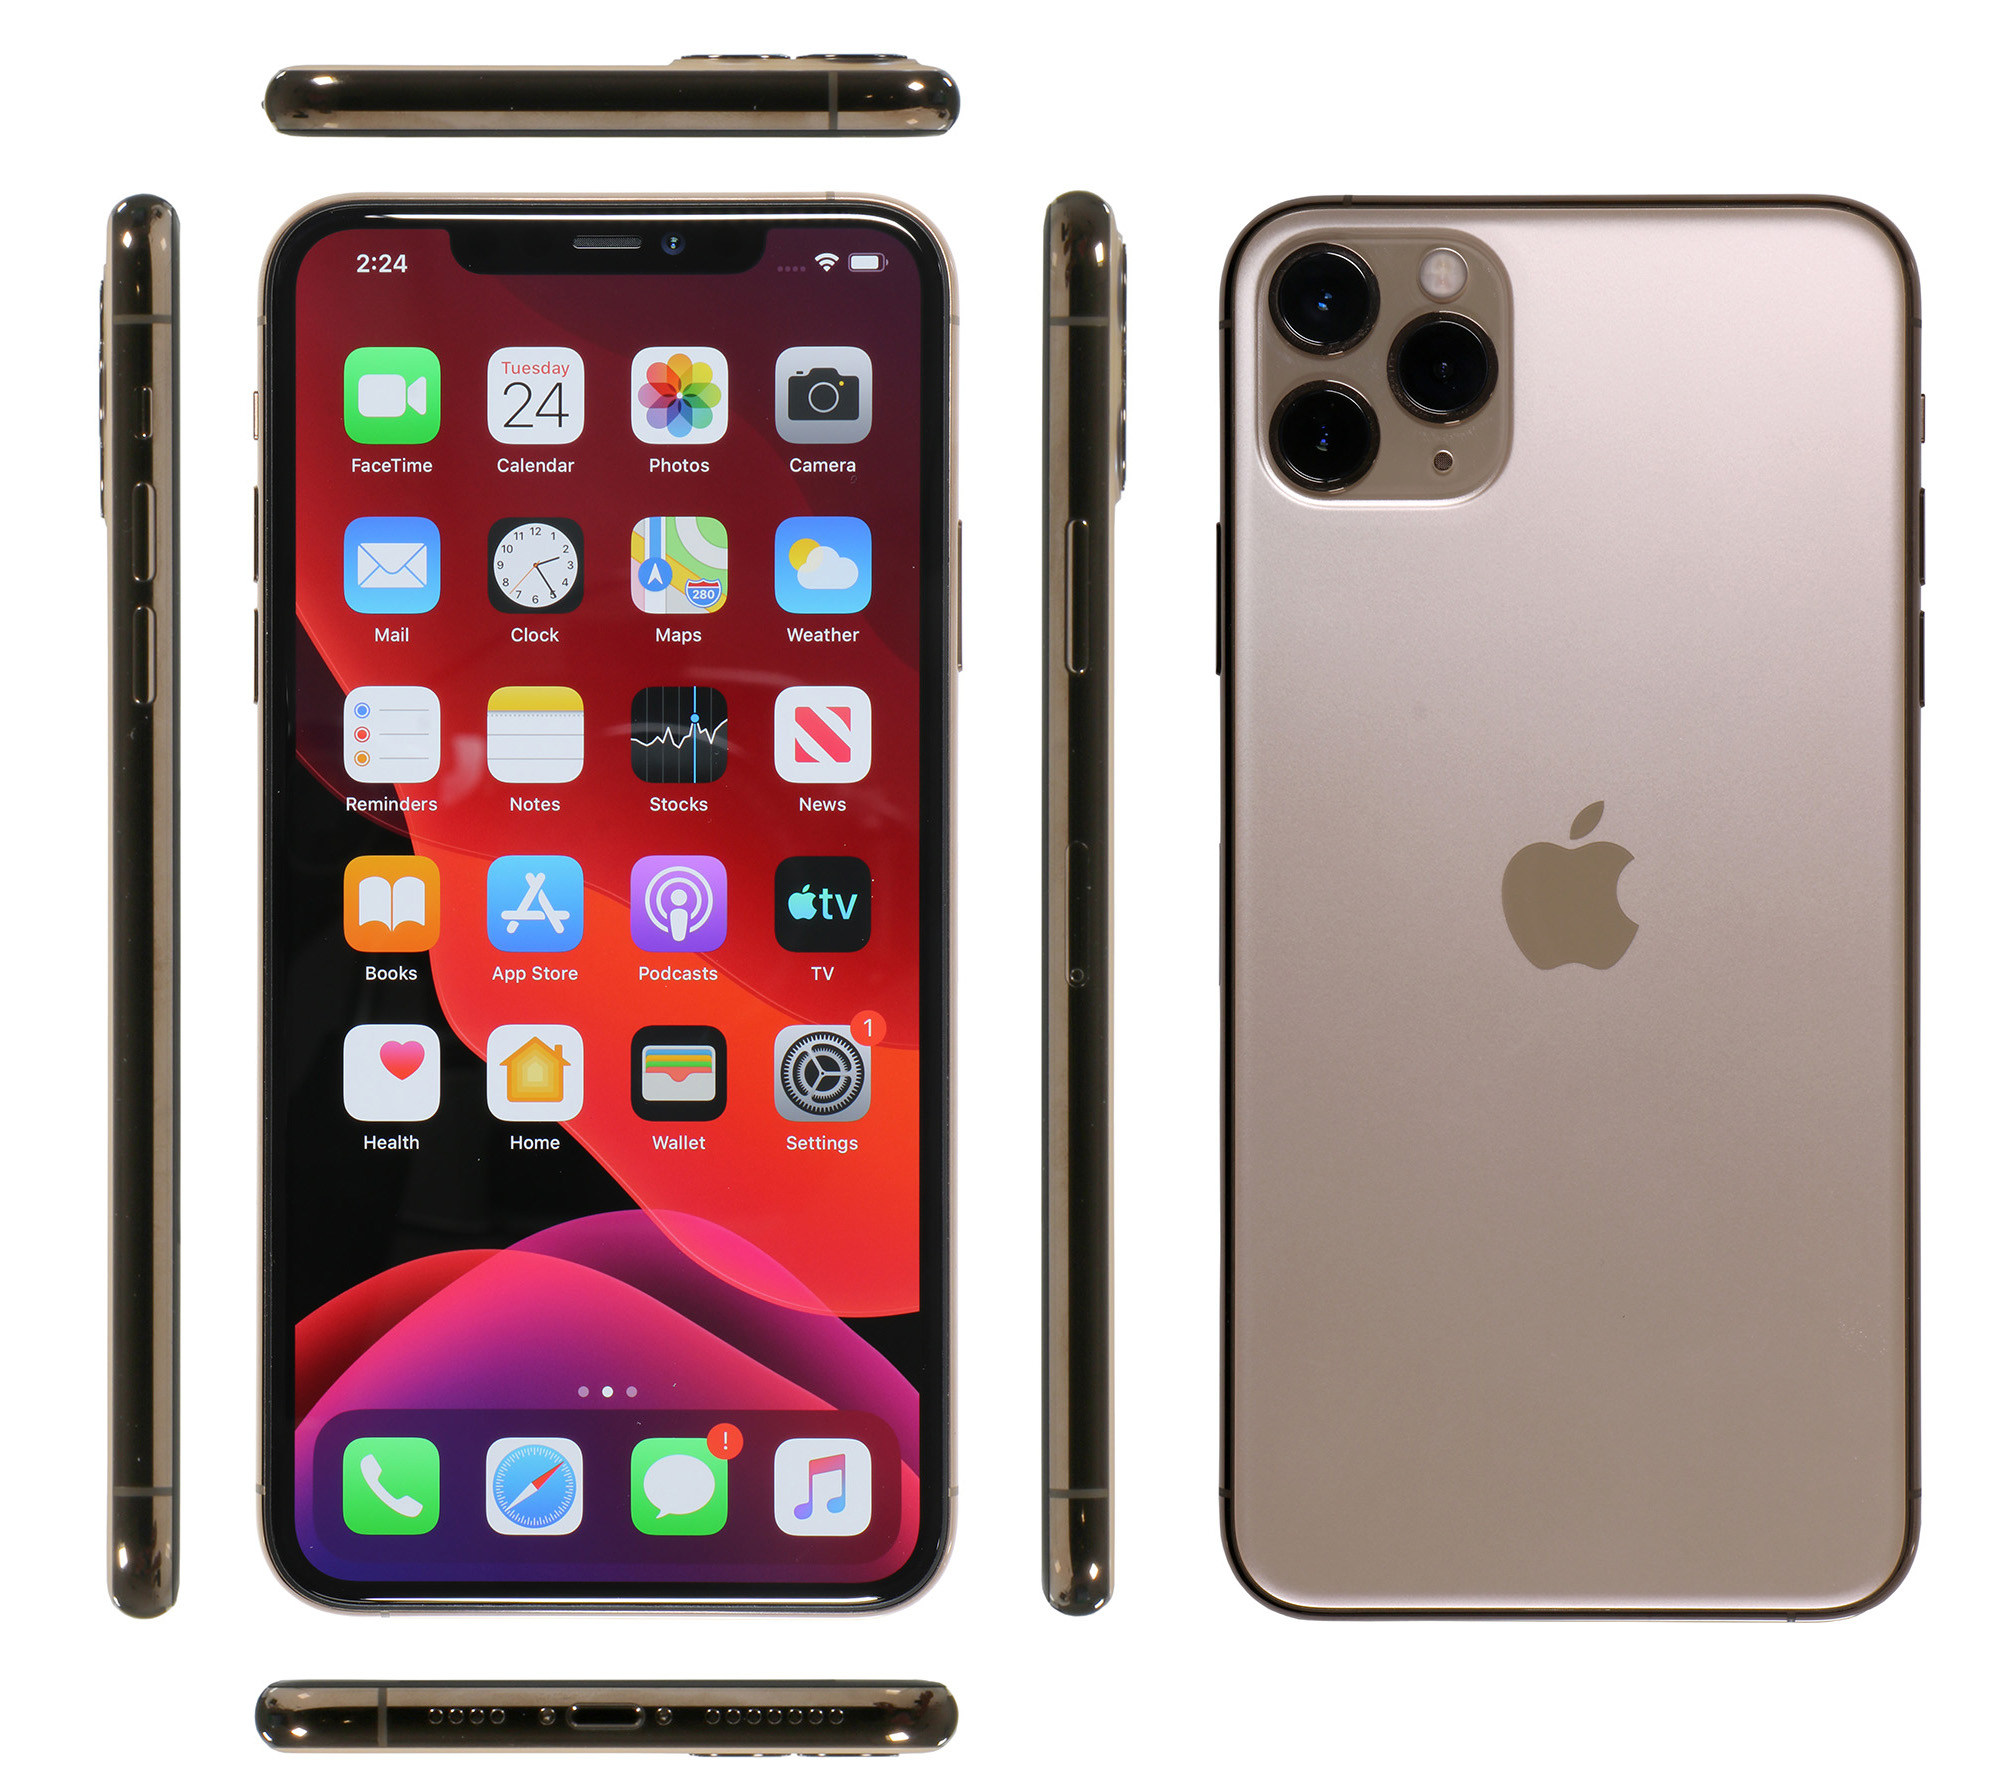 Apple iPhone 11 Pro Phone Specifications And Price